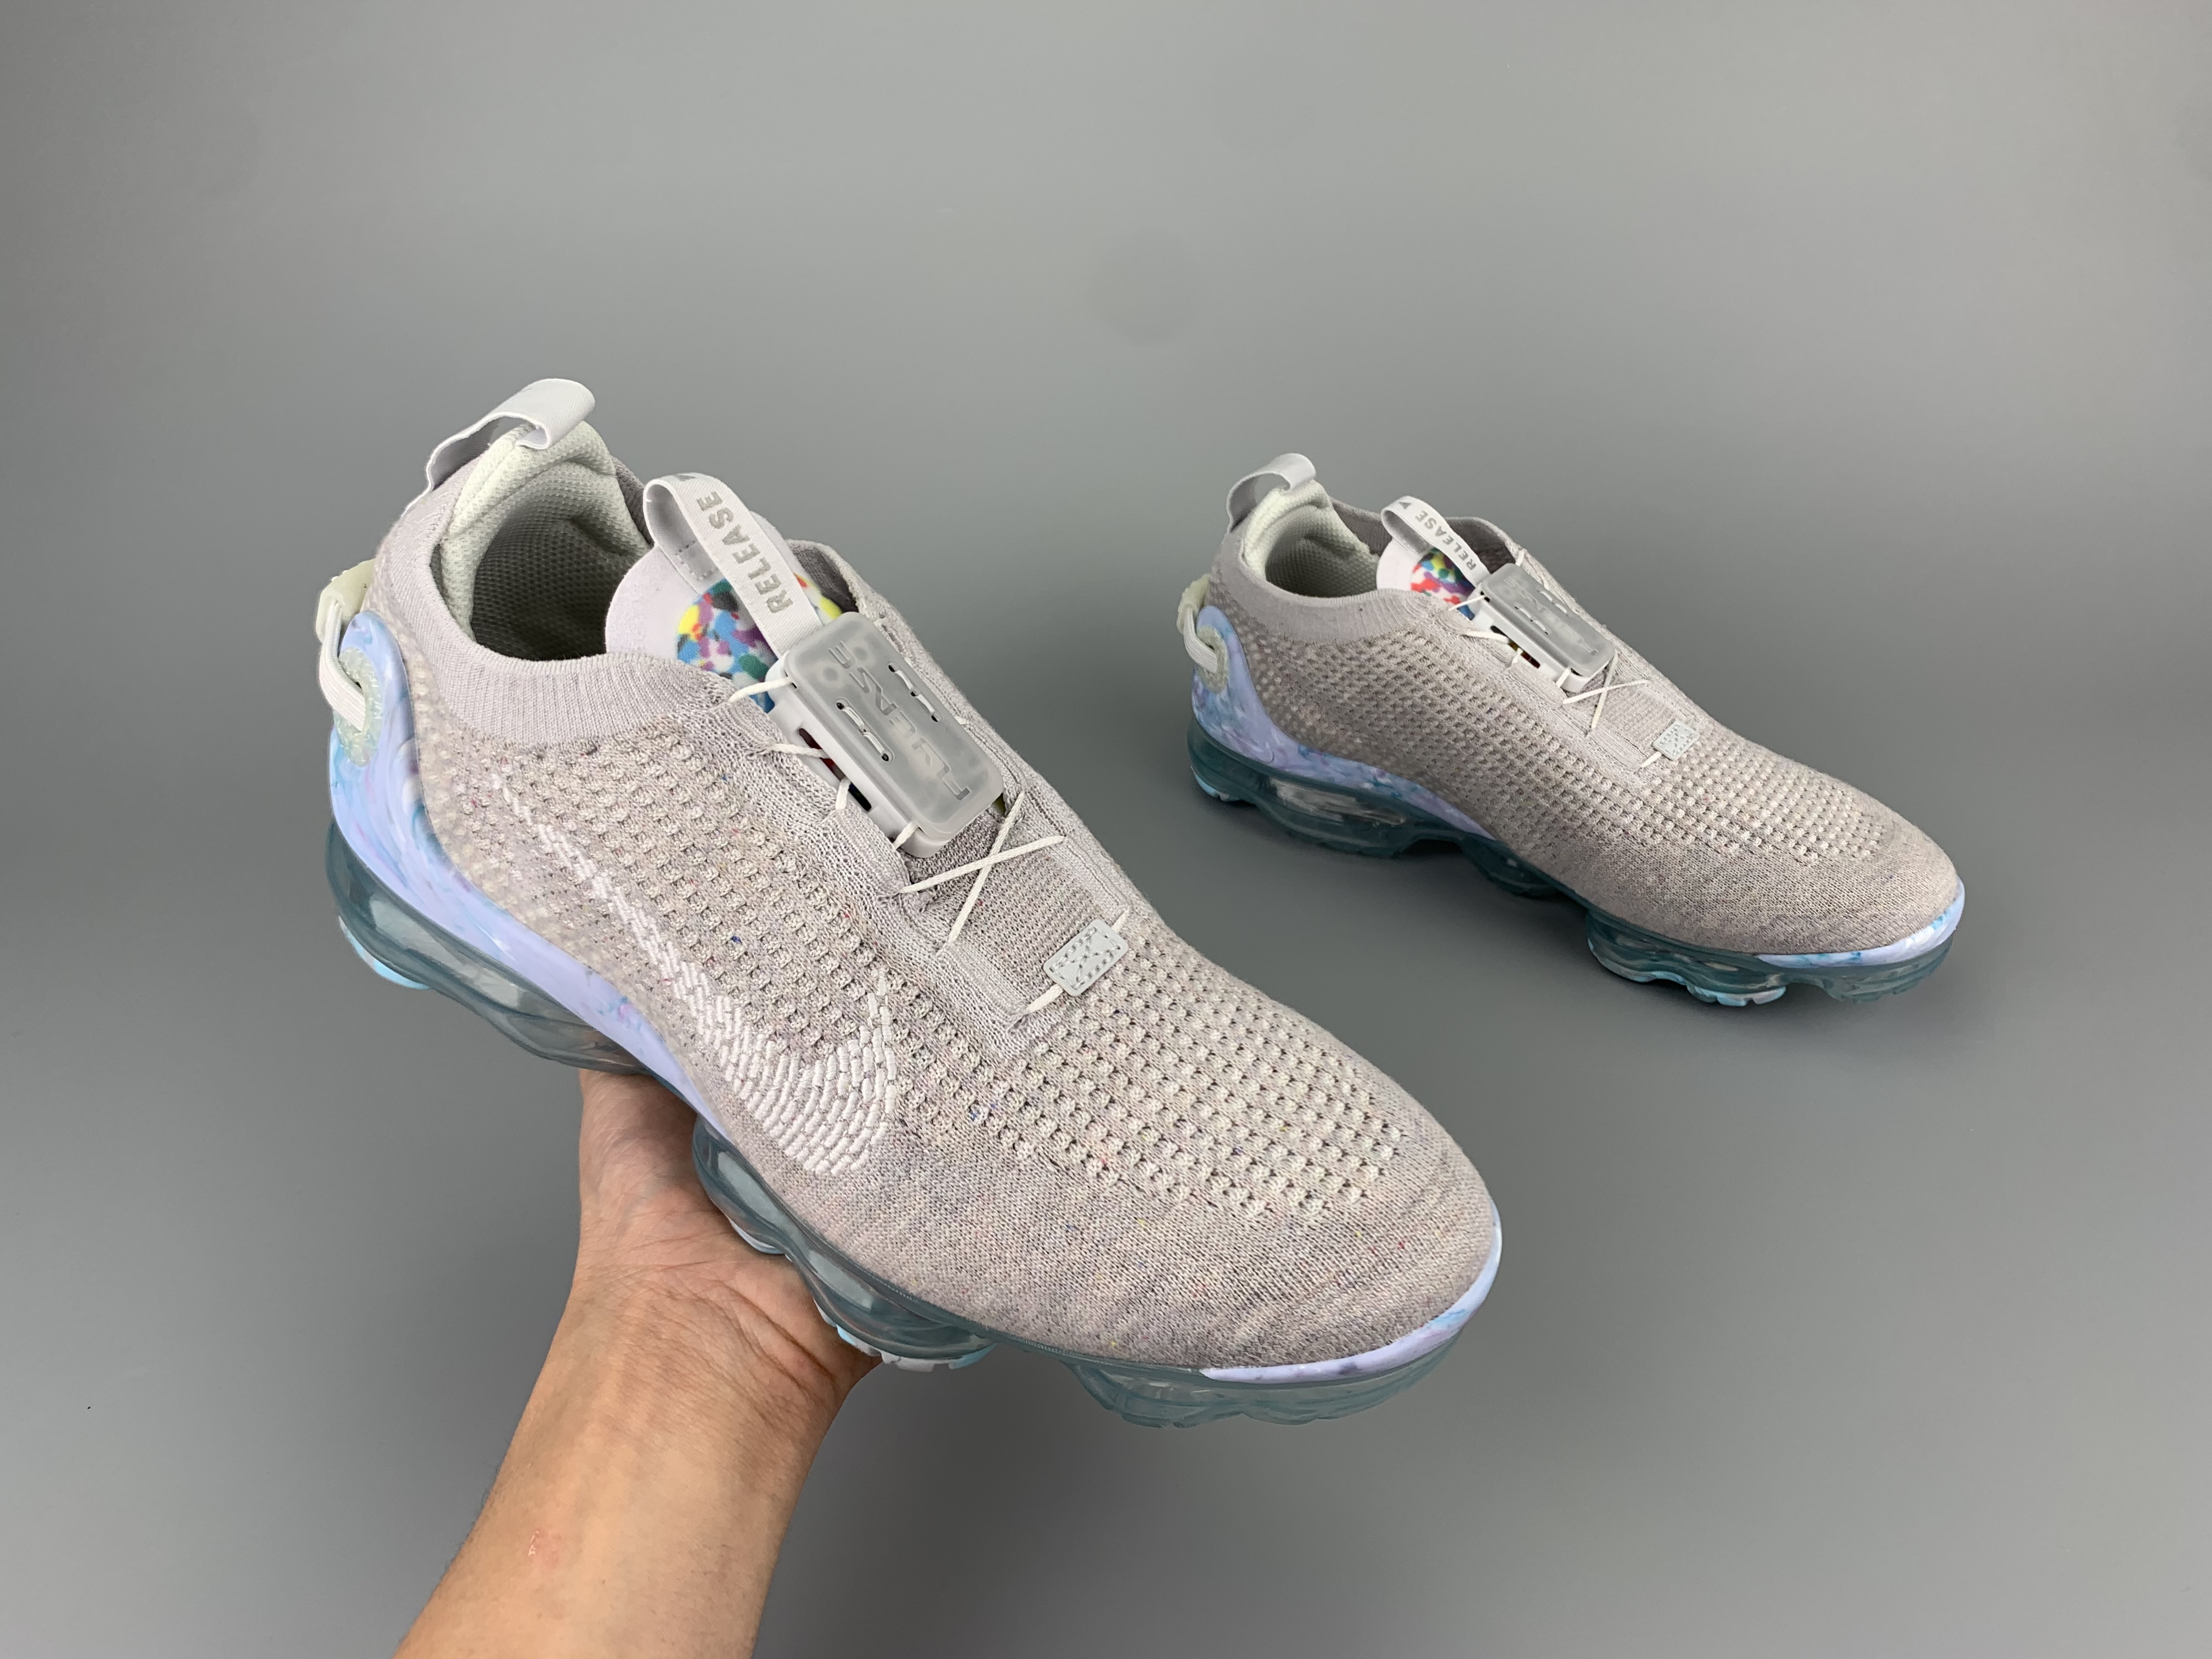 New Nike VaporMax 2020 Grey Blue Sole Shoes For Women